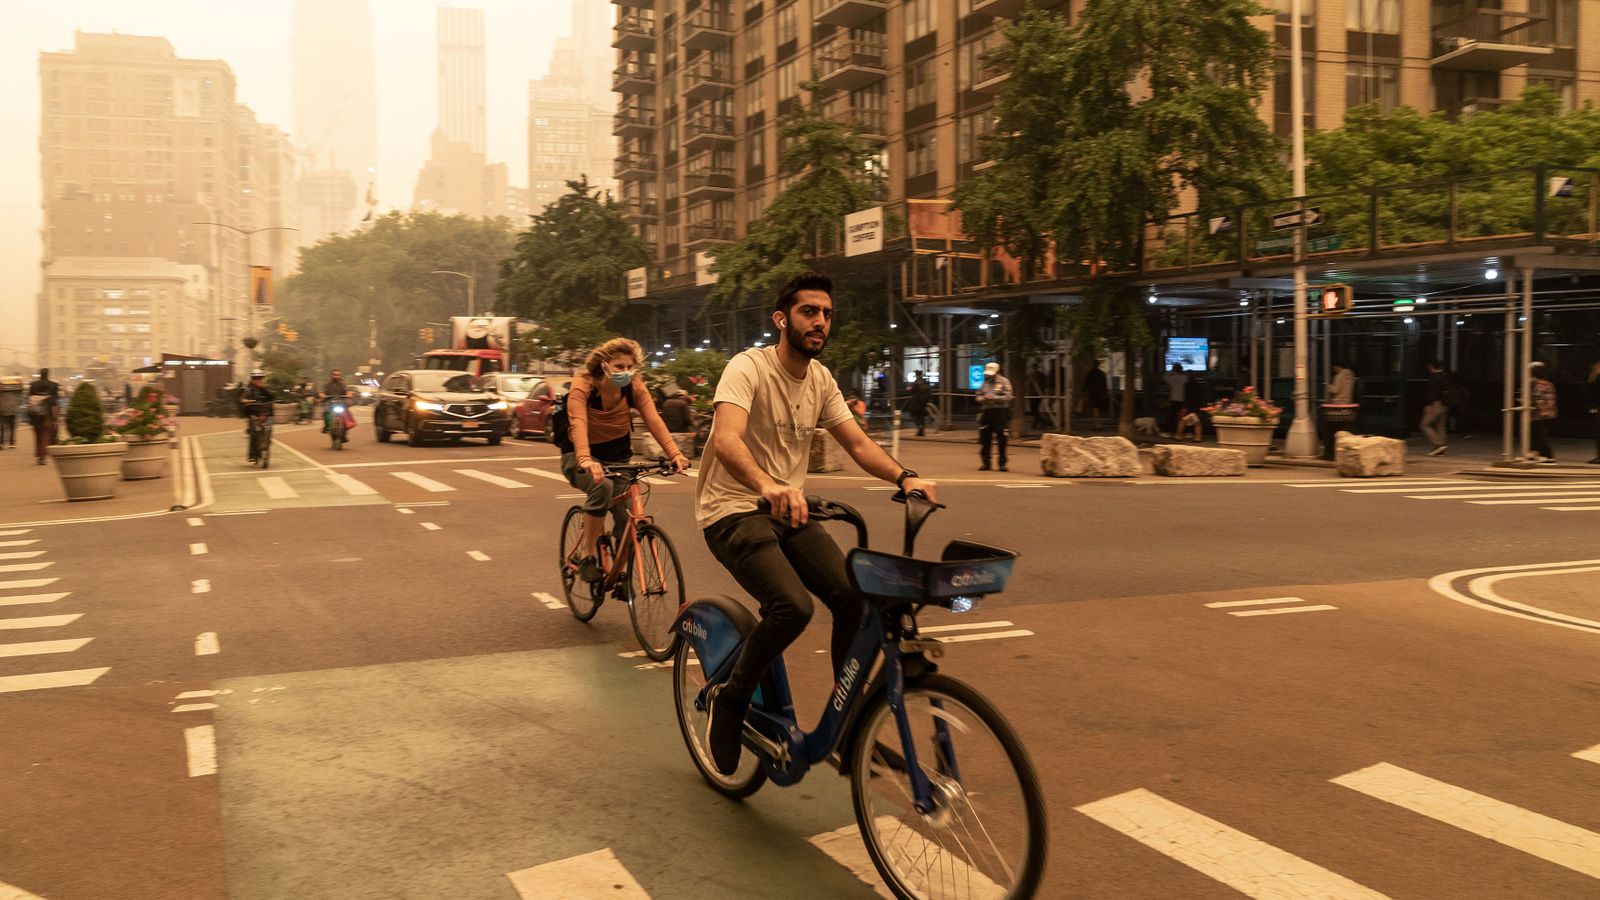 Two cyclists navigate smoggy streets in New York City (Credit: Getty Images)